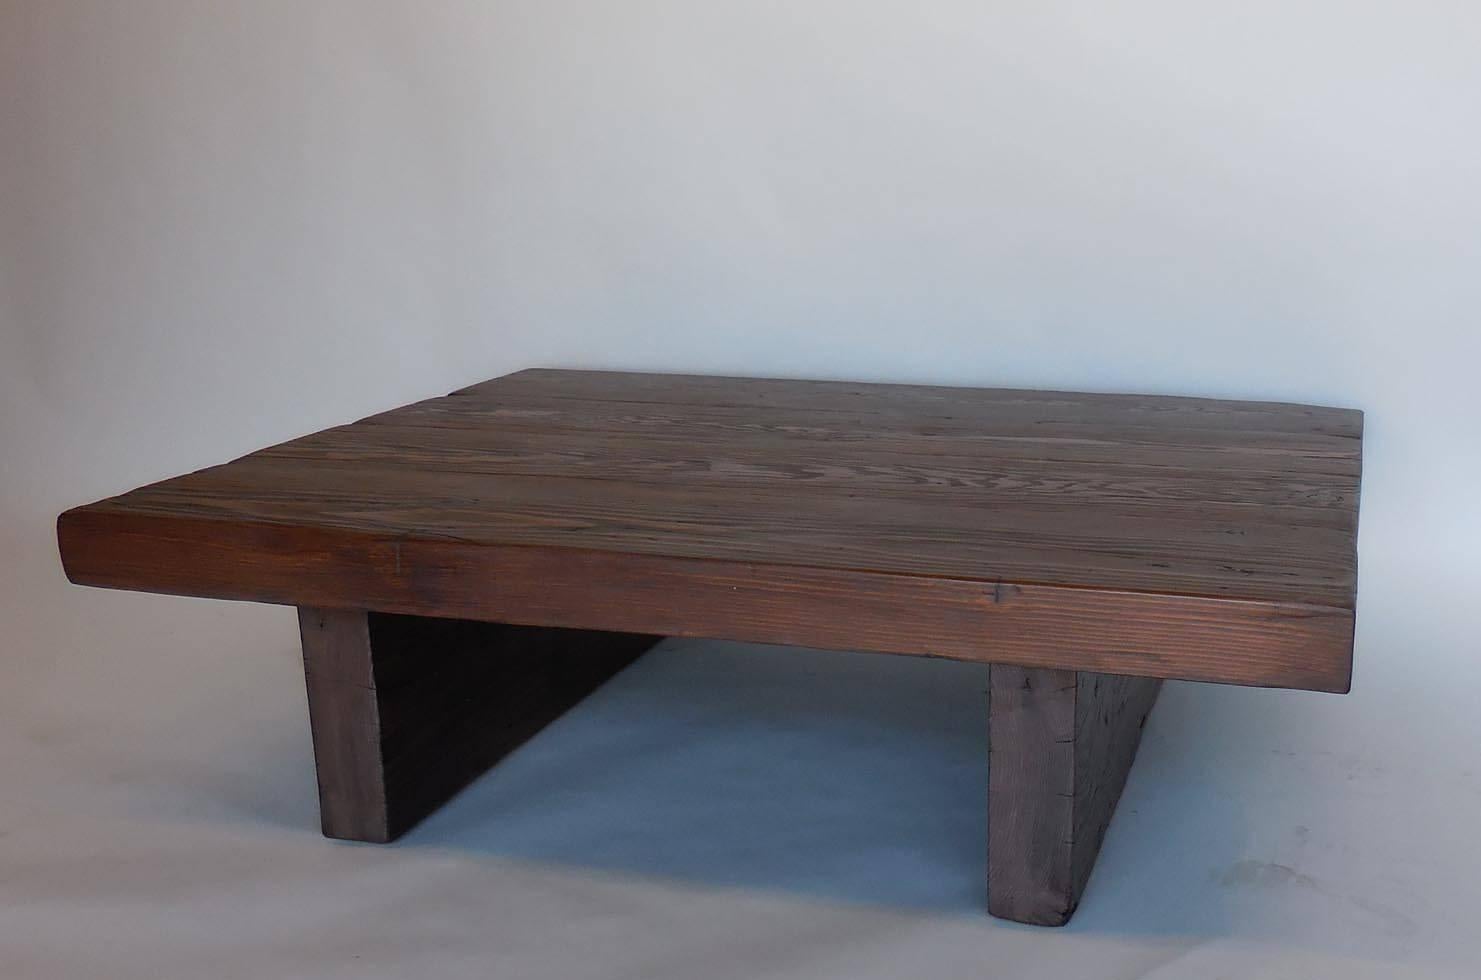 Reclaimed 100 year old beam coffee table. Slabs are 3.5 inches thick. Great old warm natural patina. Naturally worn wood. Can be made in custom sizes. Made in Los Angeles by Dos Gallos Studio. This existing piece is on sale. Please inquire for